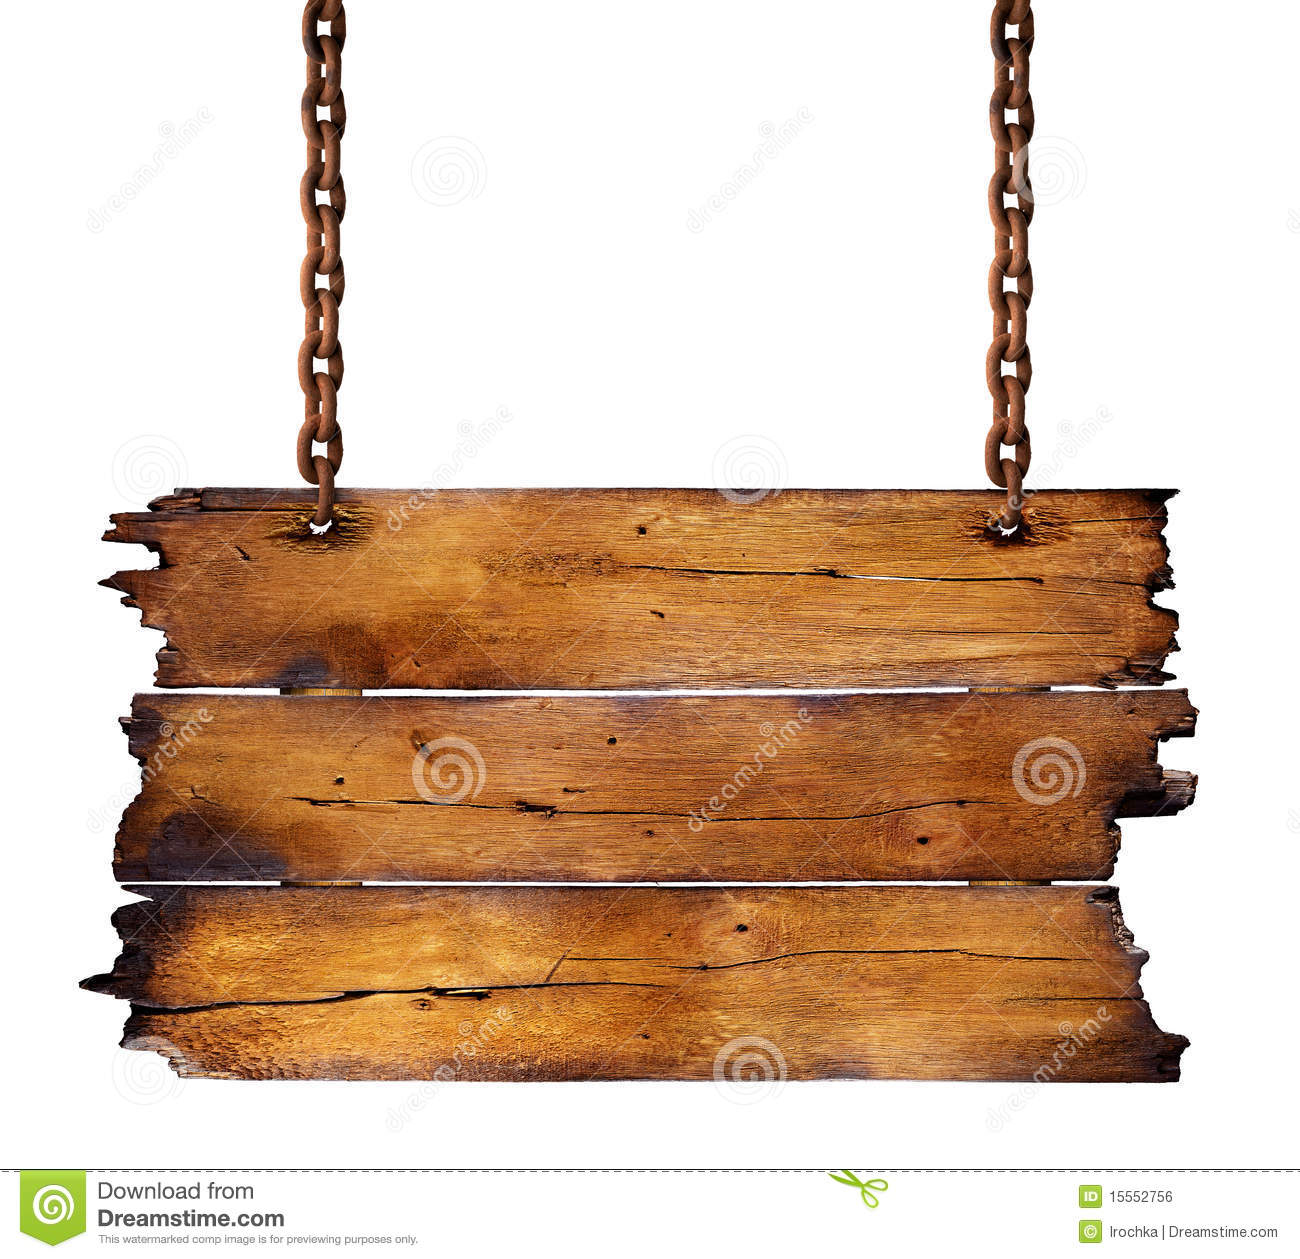 Wooden Sign Royalty Free Stock Image   Image  15552756